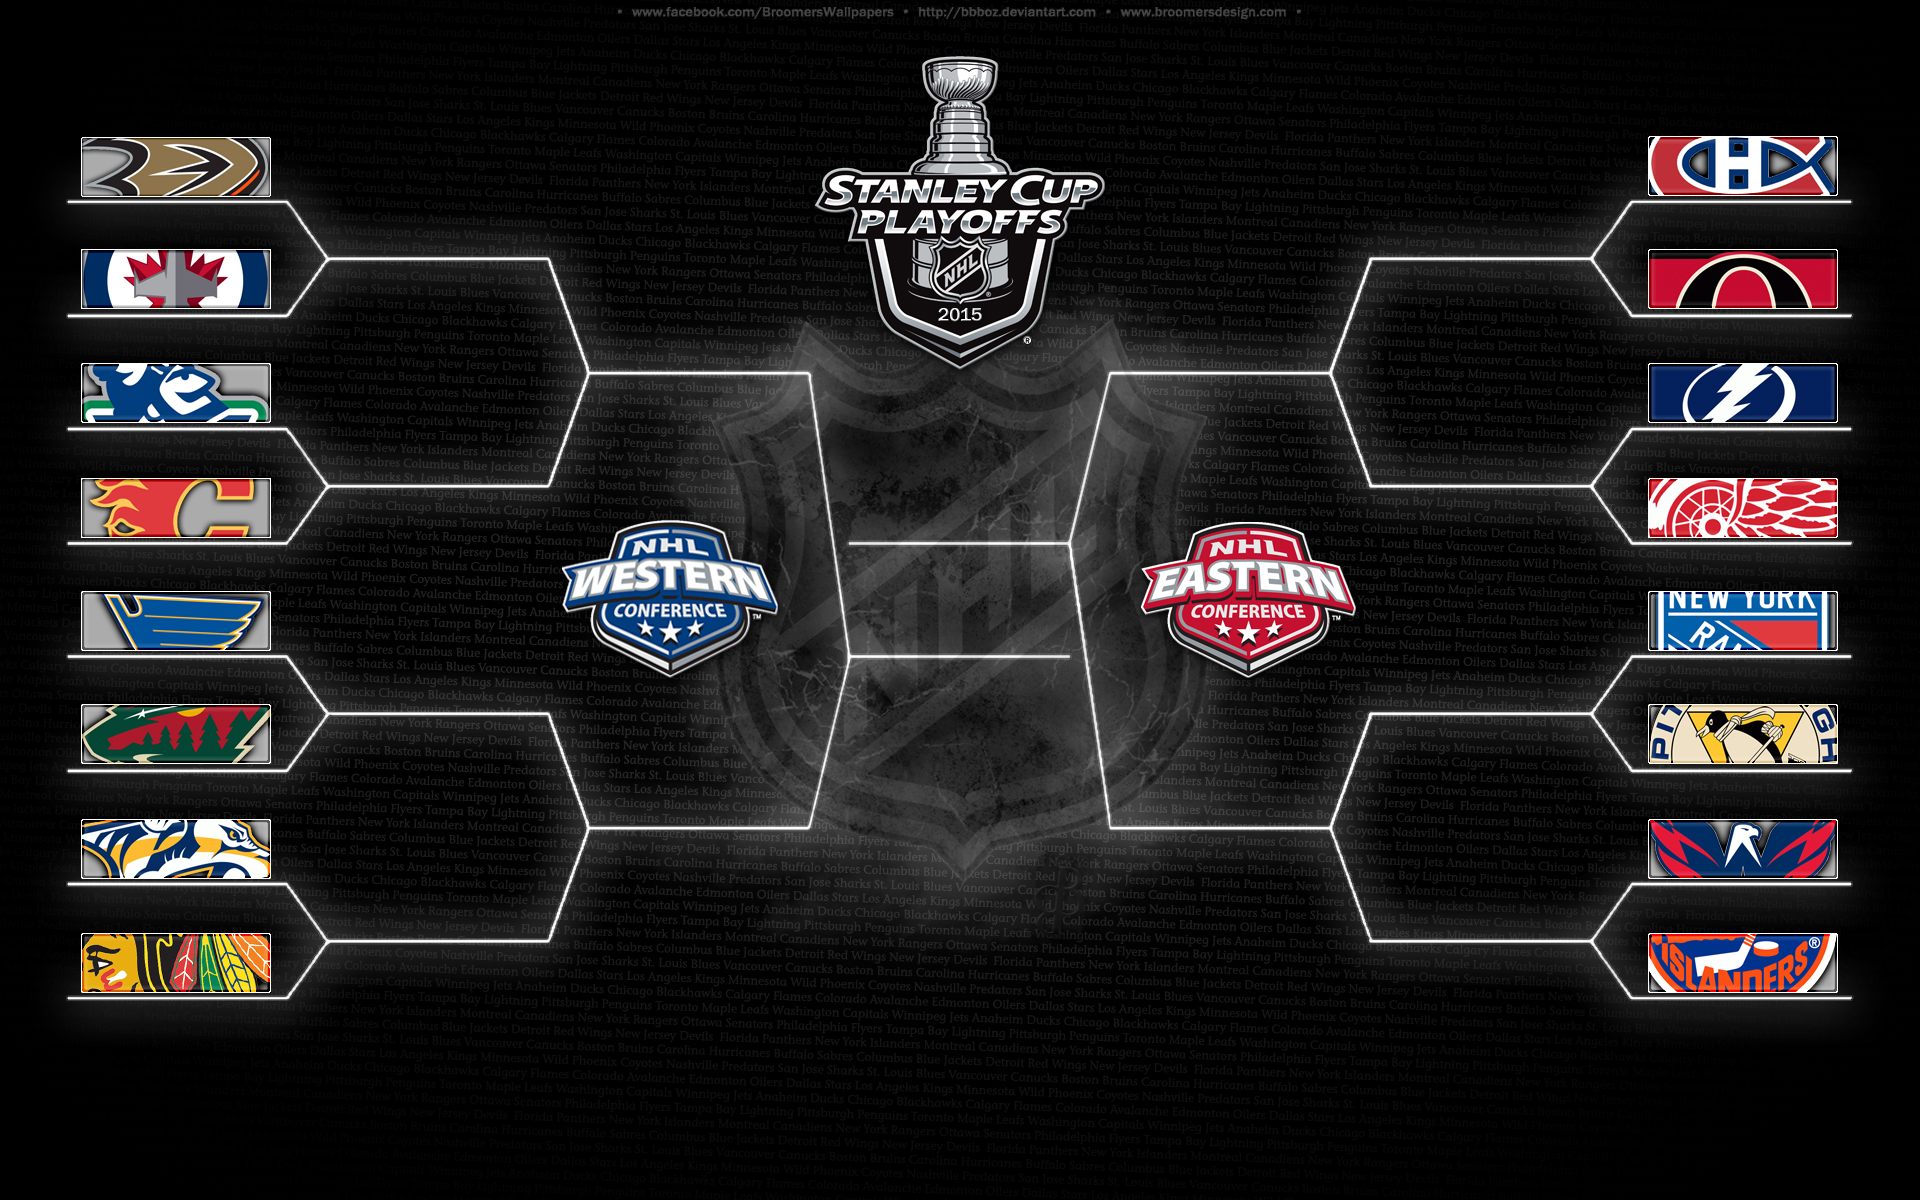 my 2023 Stanley Cup Prediction, St. Louis Blues over the 4th